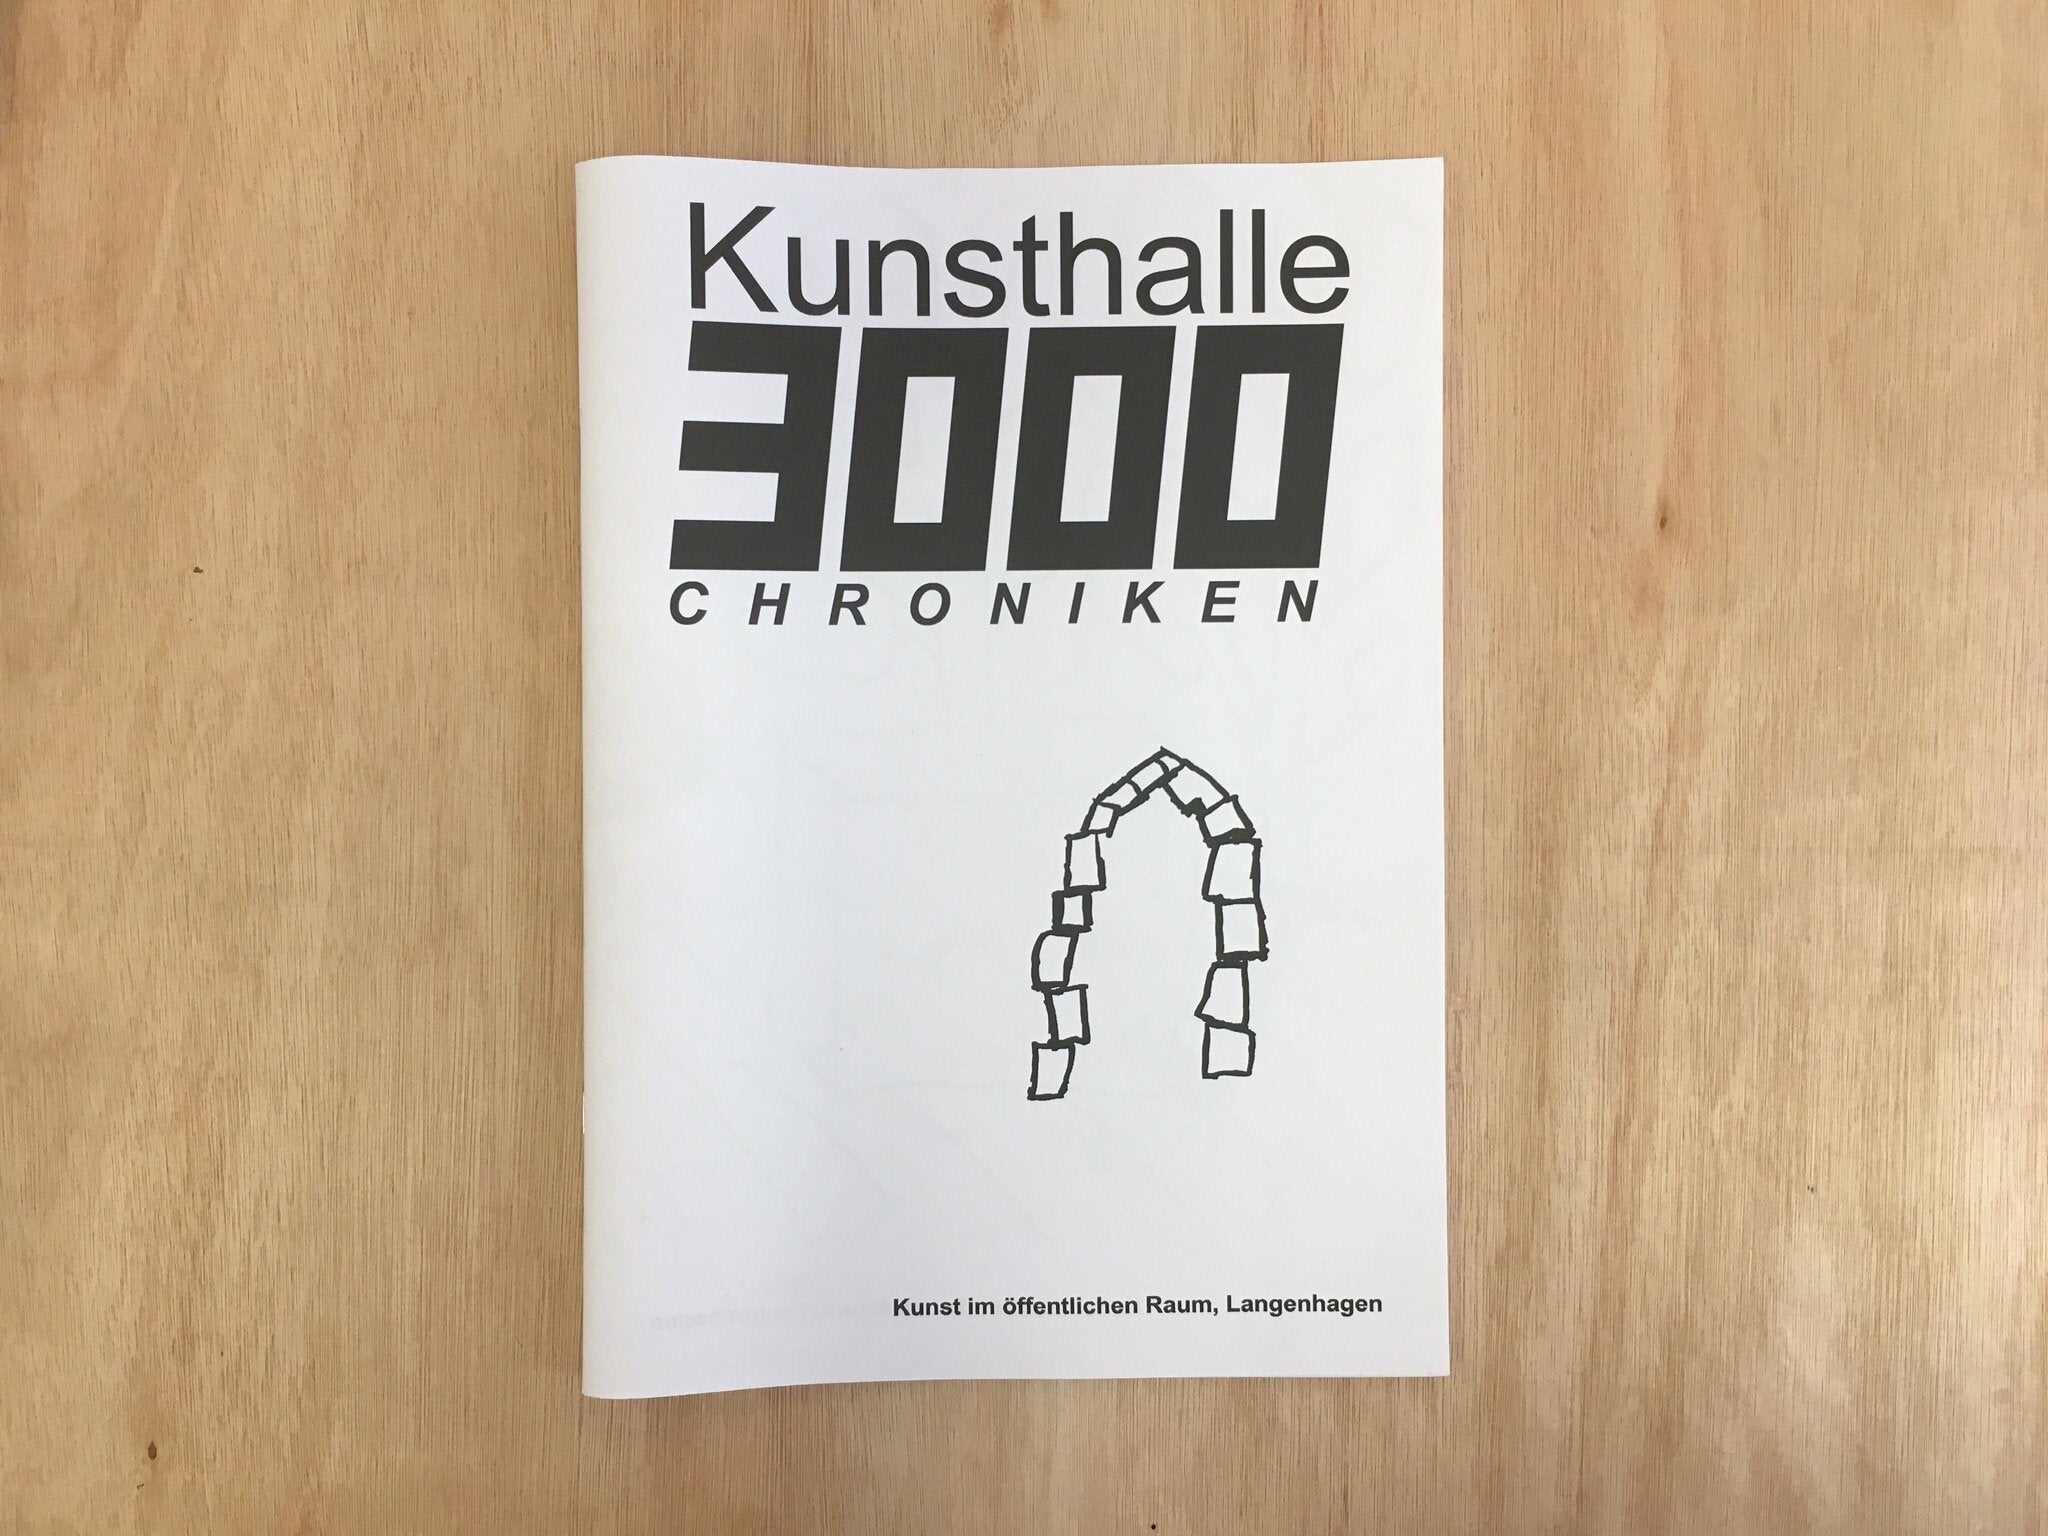 KUNSTHALLE3000–CHRONICLES by Thomas Geiger